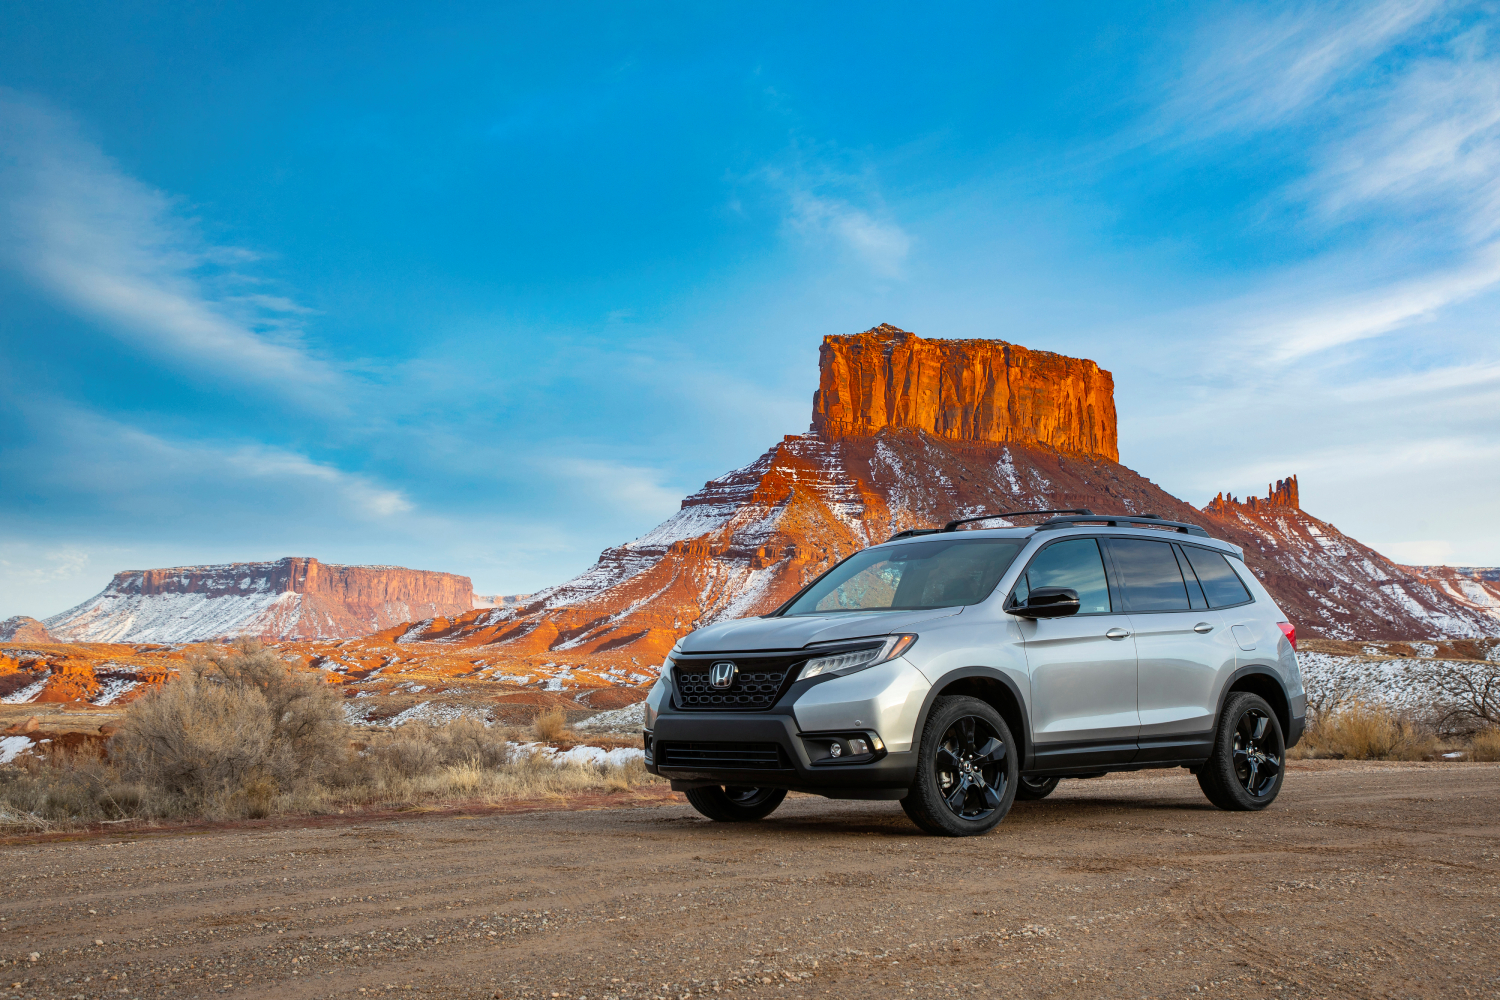 Honda Passport is one of the best SUVs for the money award from U.S. News